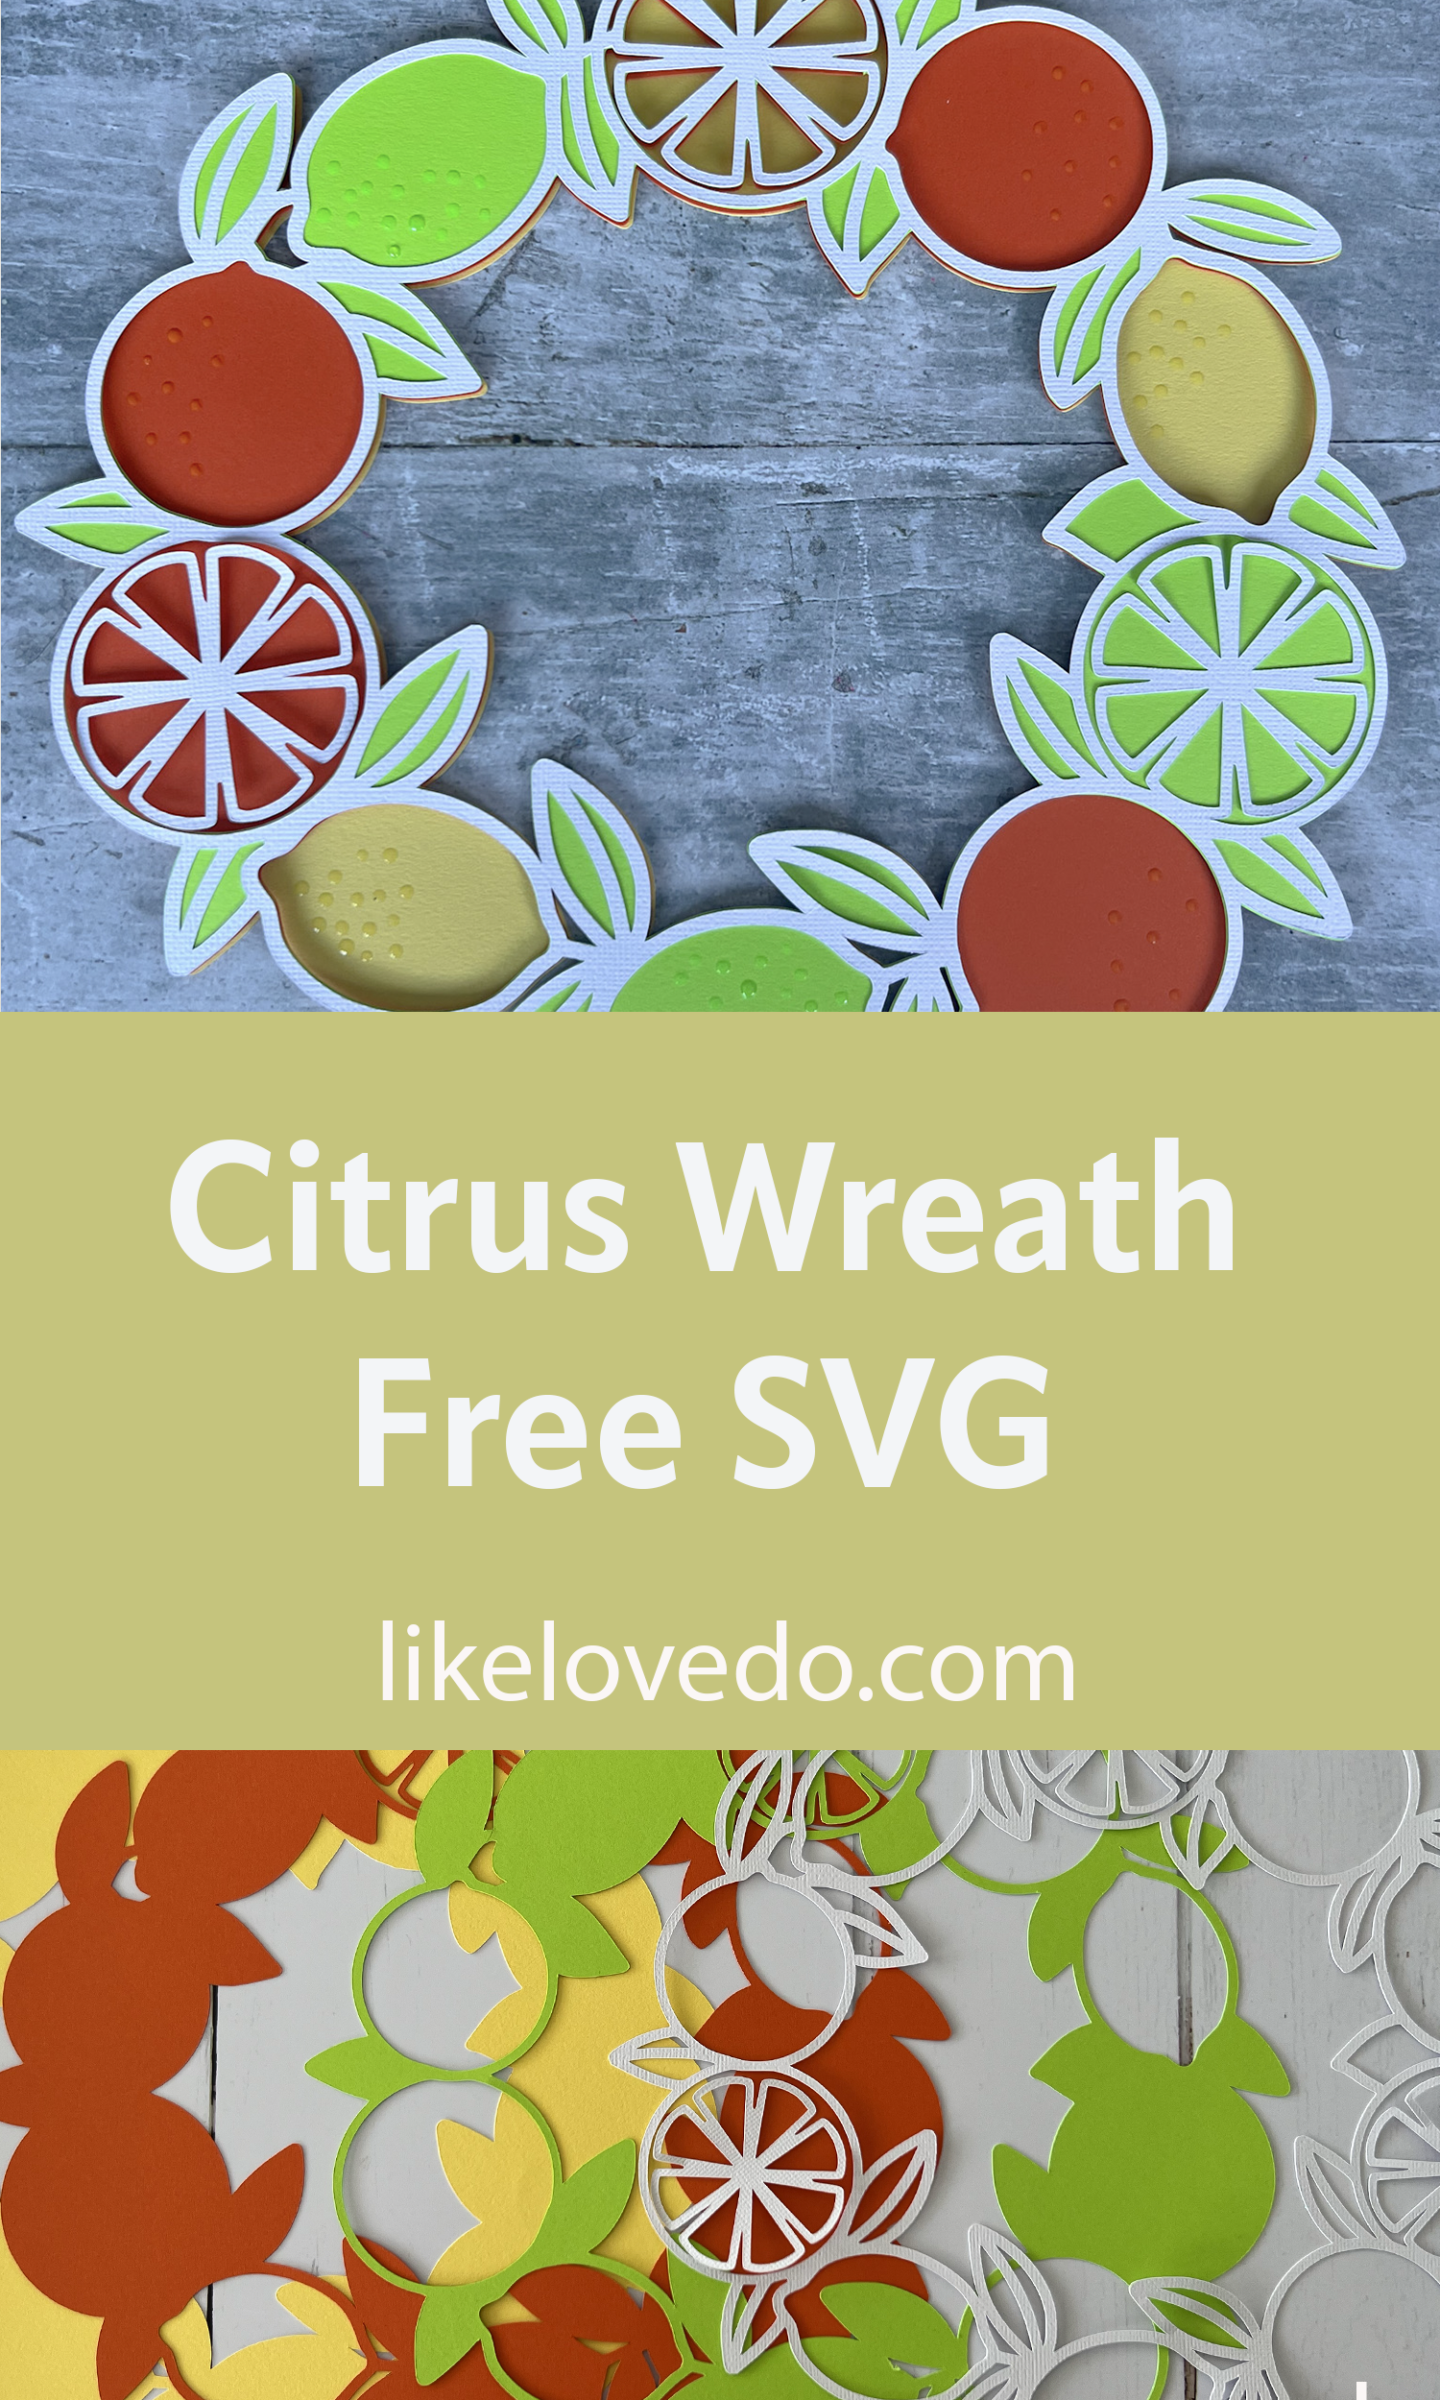 Citrus wreath SVG for scrapbooking with oranges and lemons